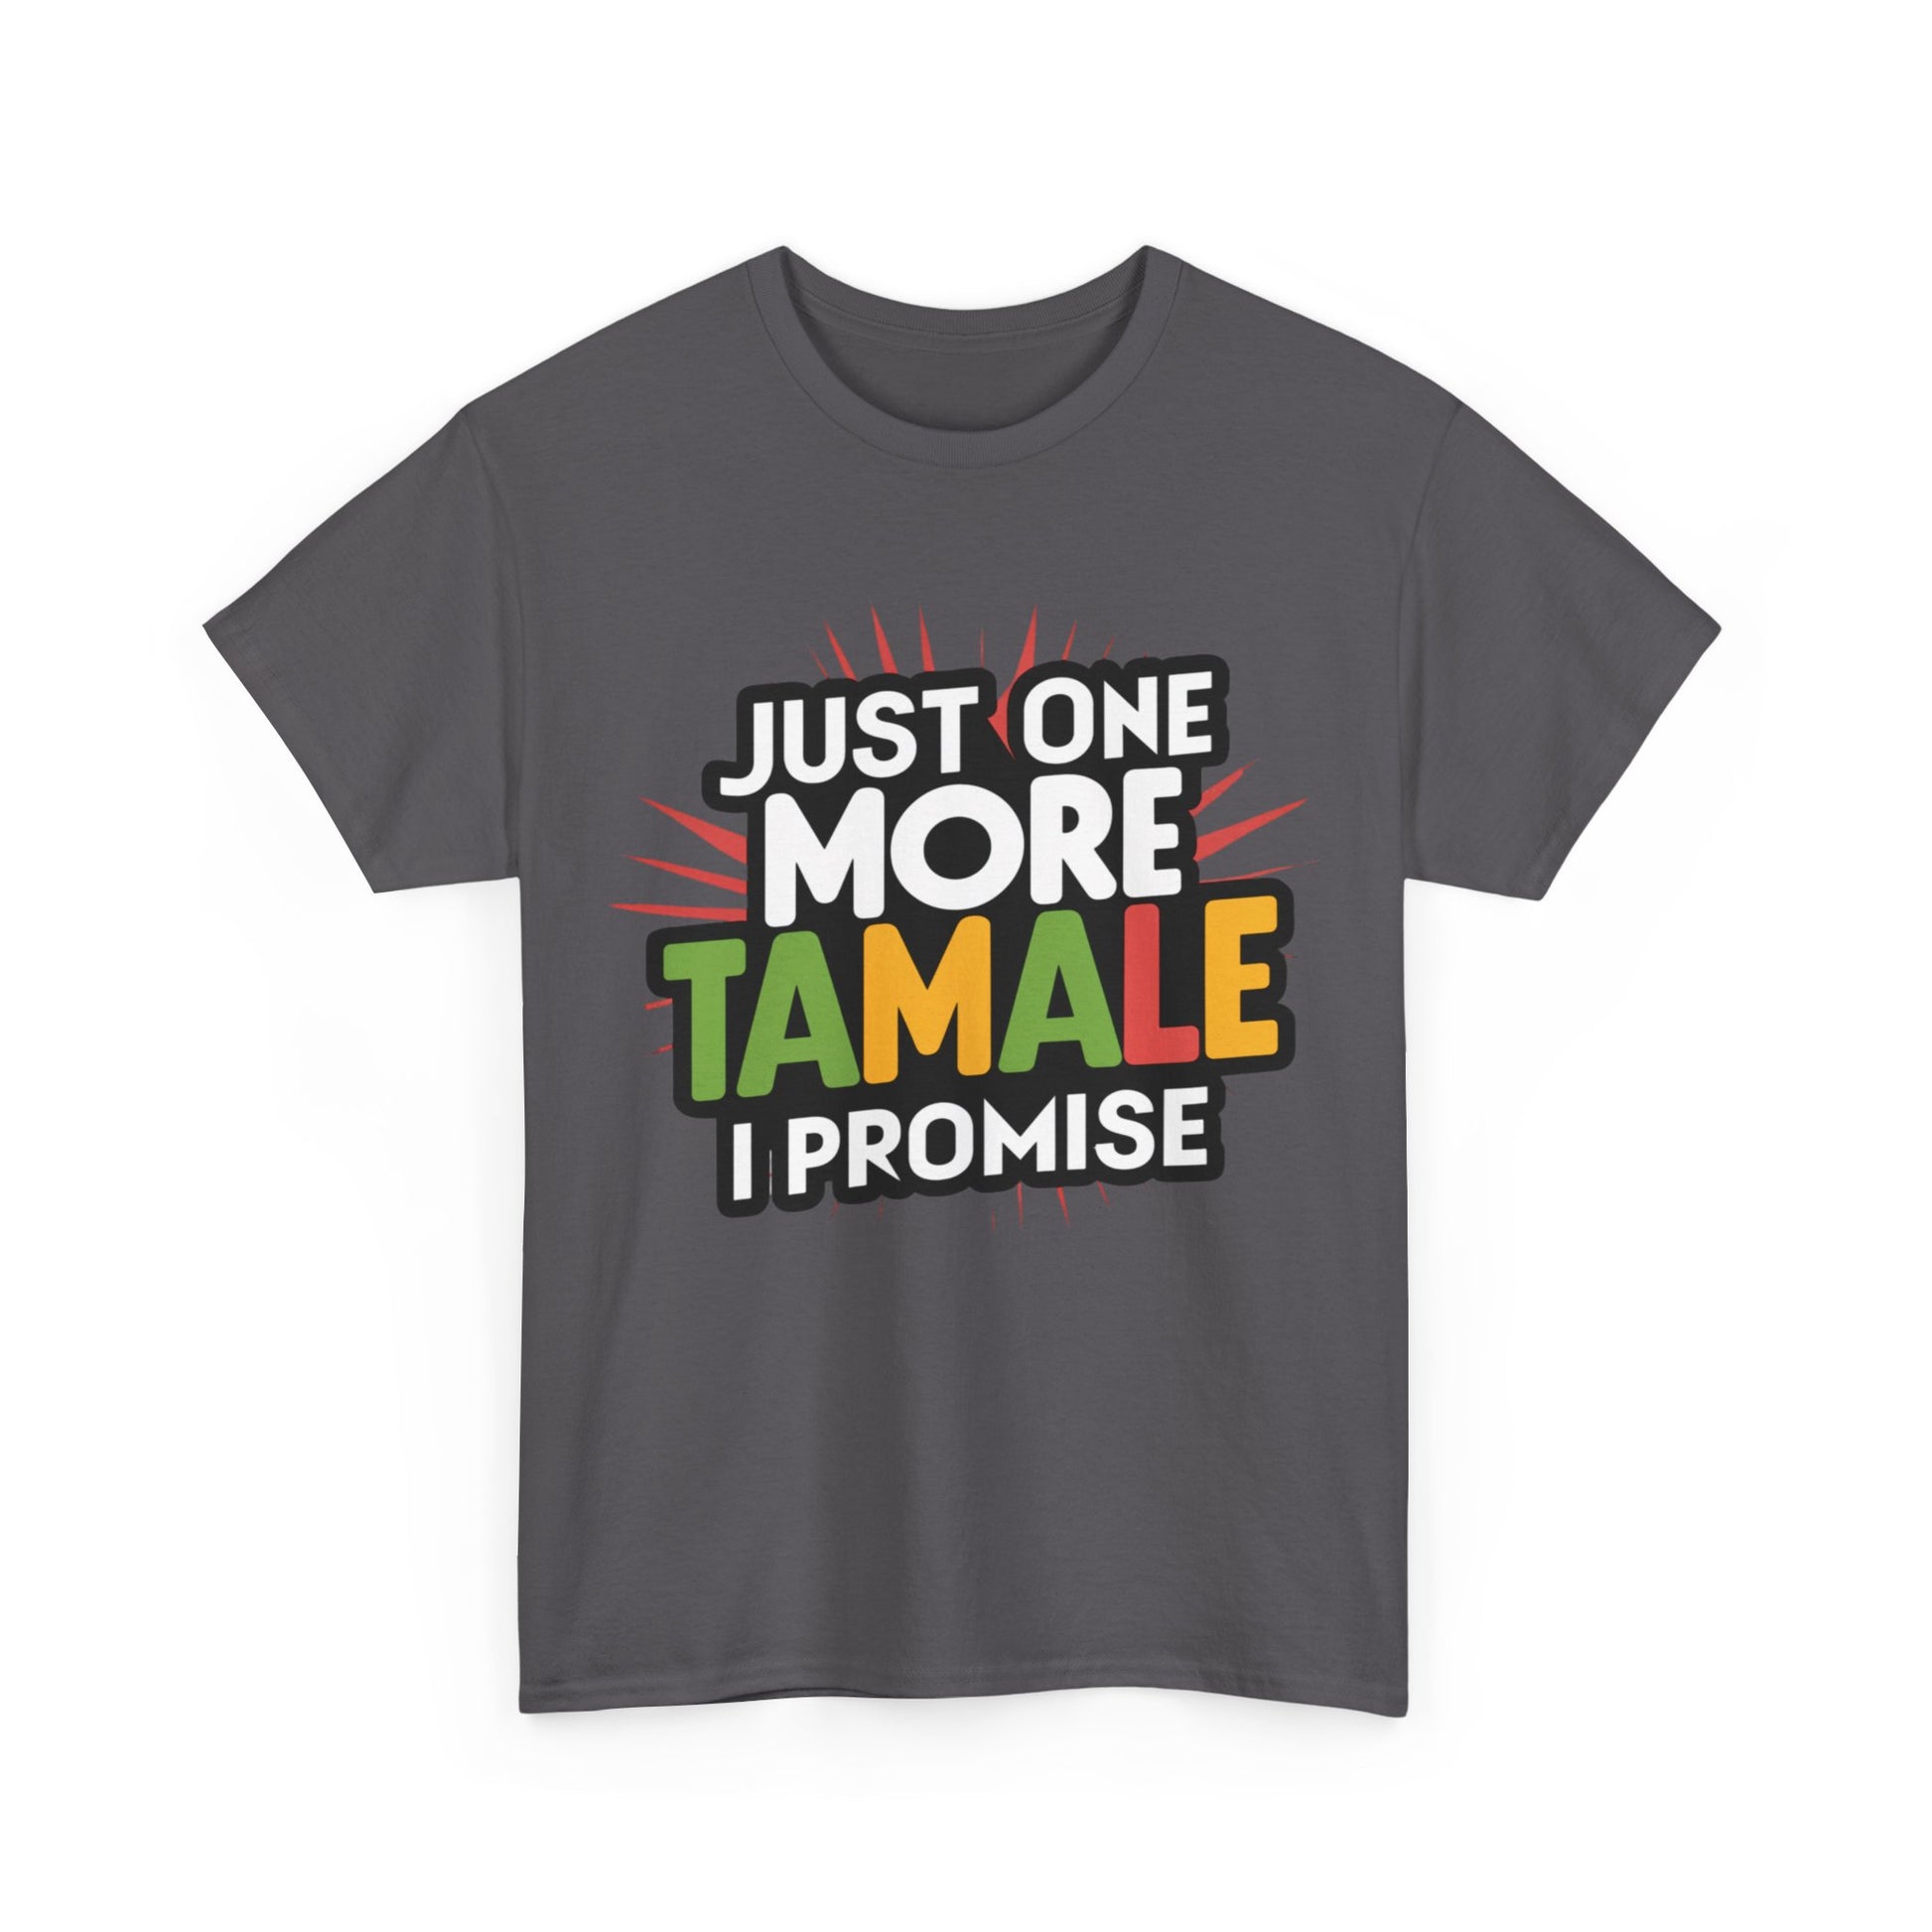 Just One More Tamale I Promise Mexican Food Graphic Unisex Heavy Cotton Tee Cotton Funny Humorous Graphic Soft Premium Unisex Men Women Charcoal T-shirt Birthday Gift-18